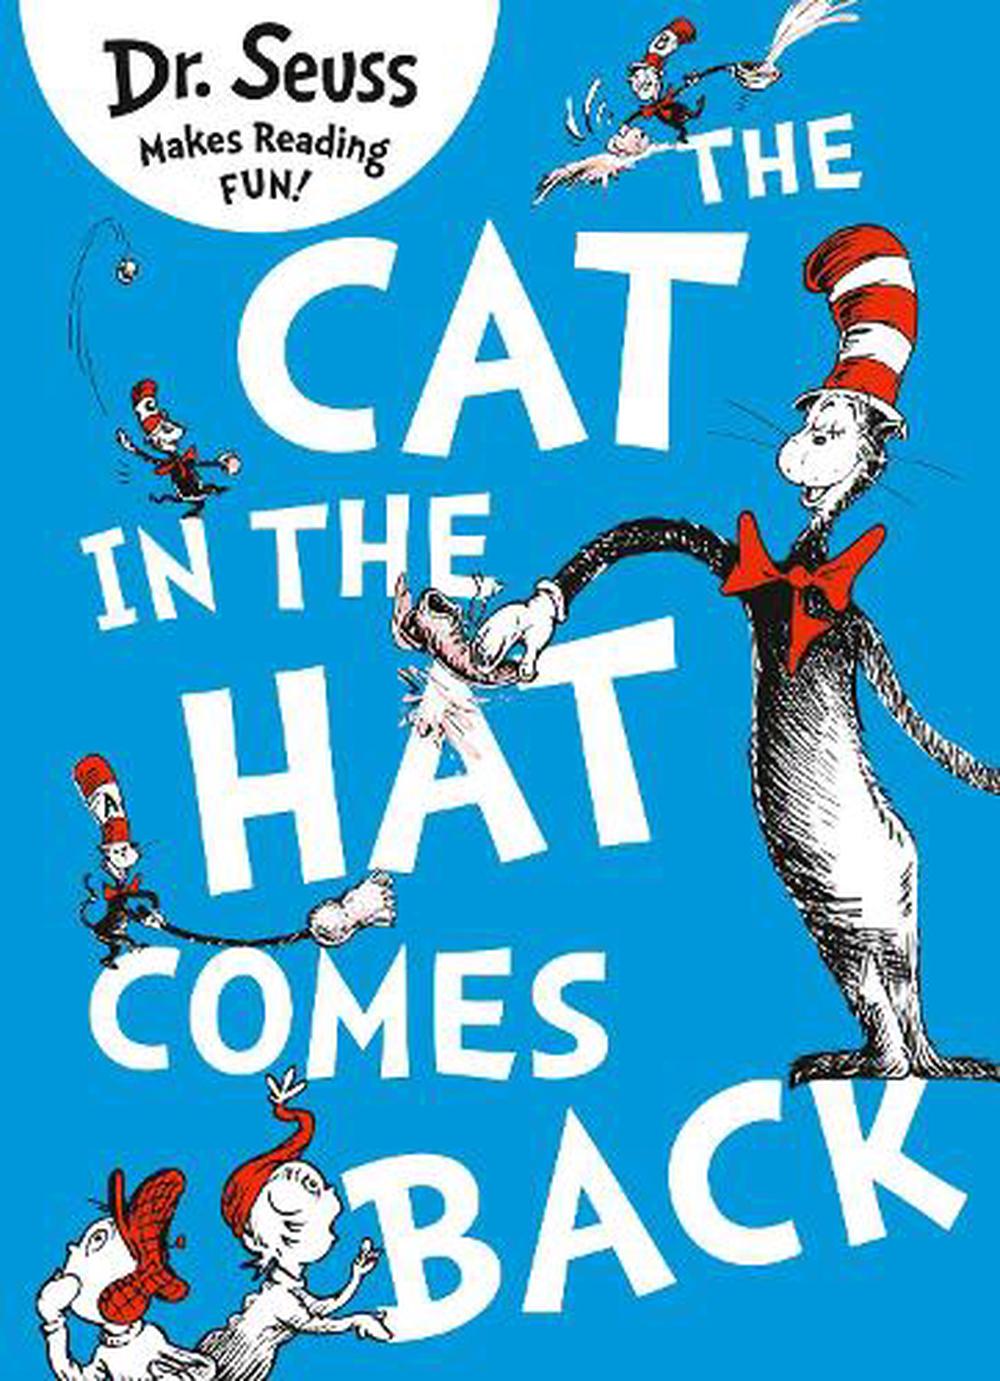 THE_CAT_IN_THE_HAT Trick and Treats